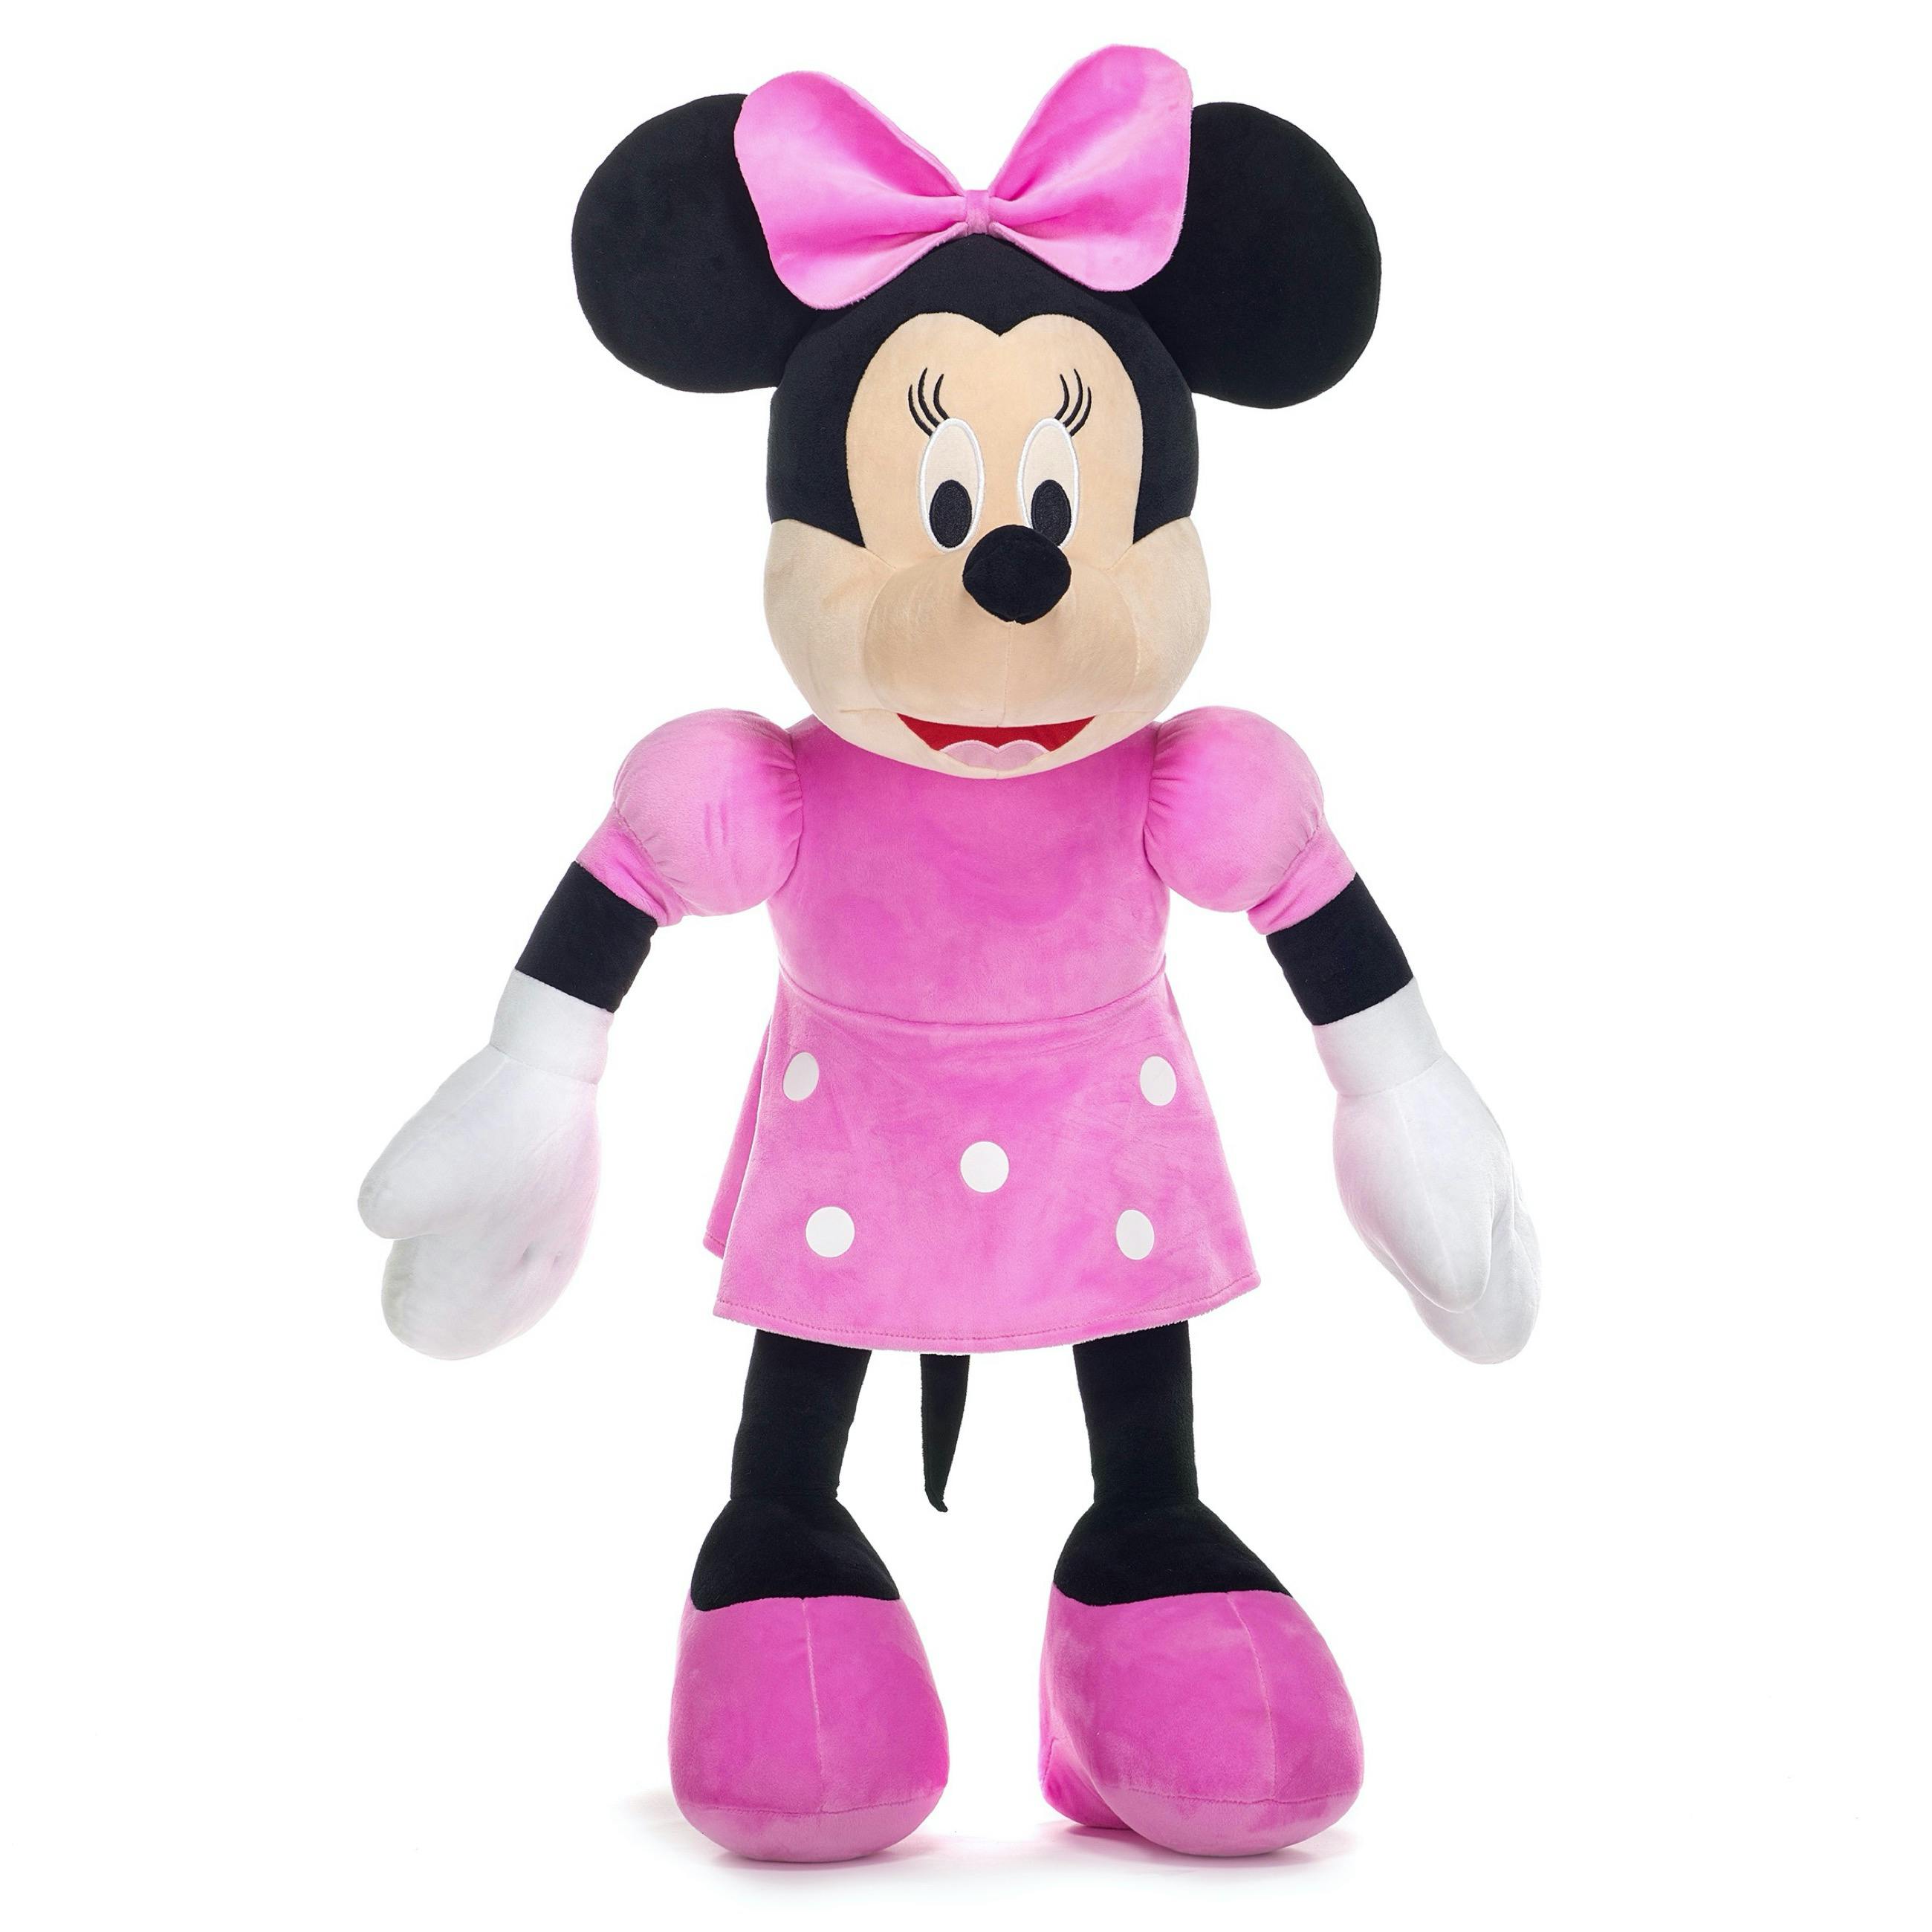 Product - Giant Minnie Mouse